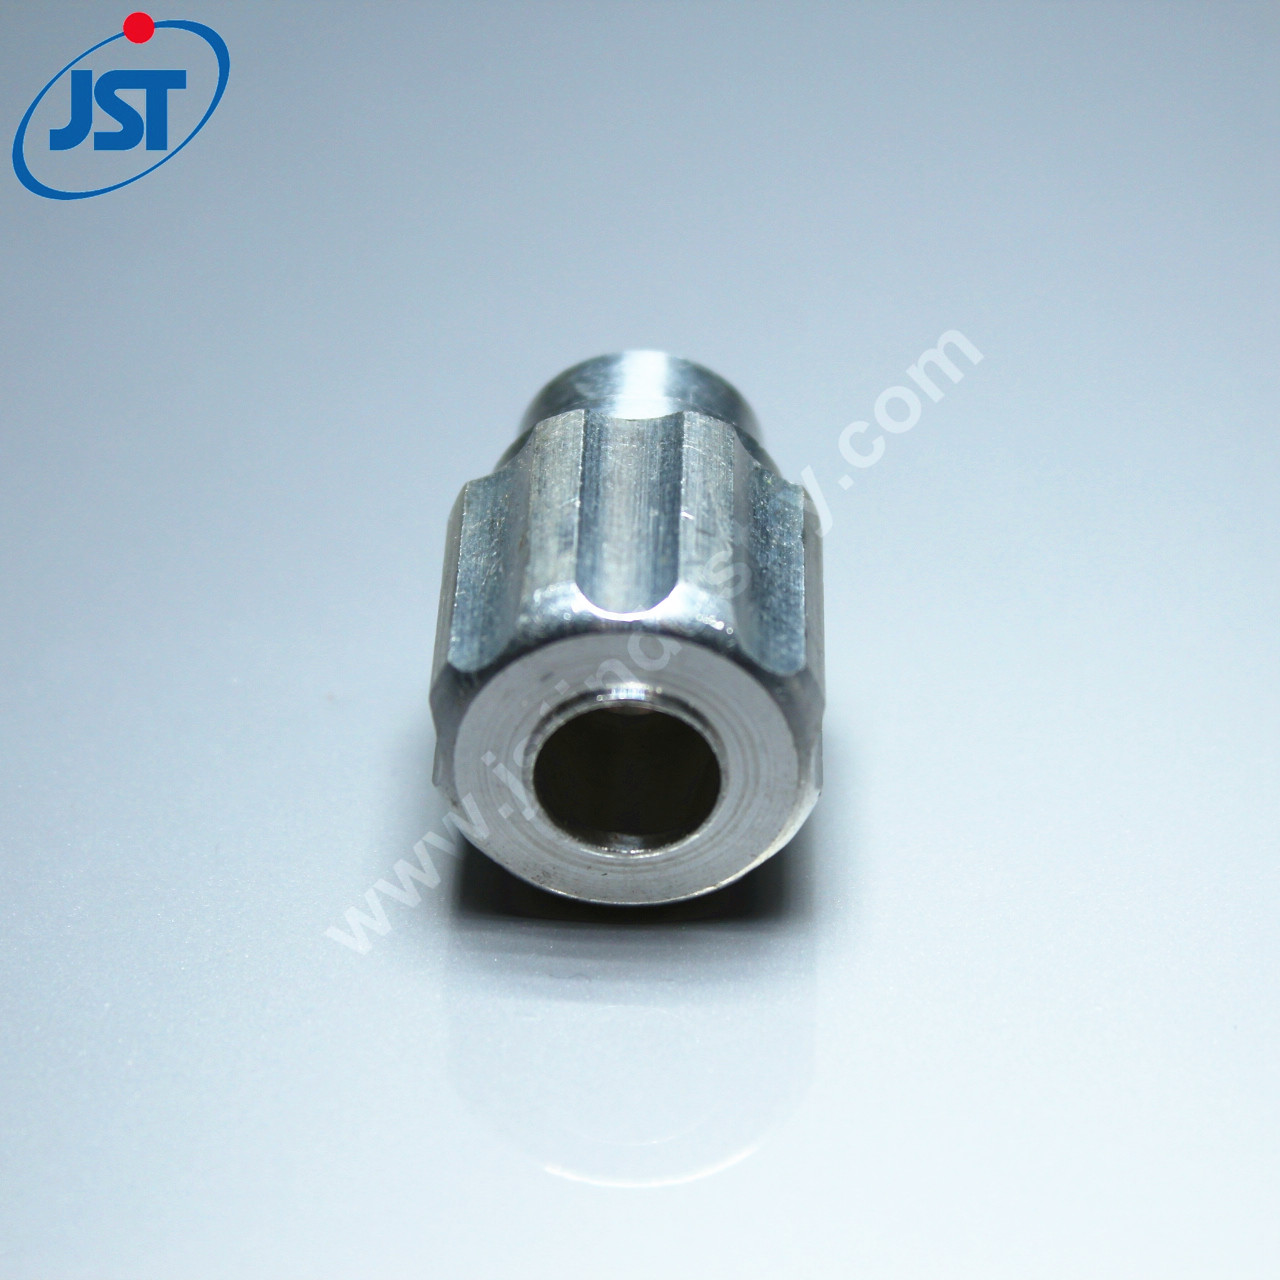 CNC Turning Aluminum Machinery Spare Parts for Motor